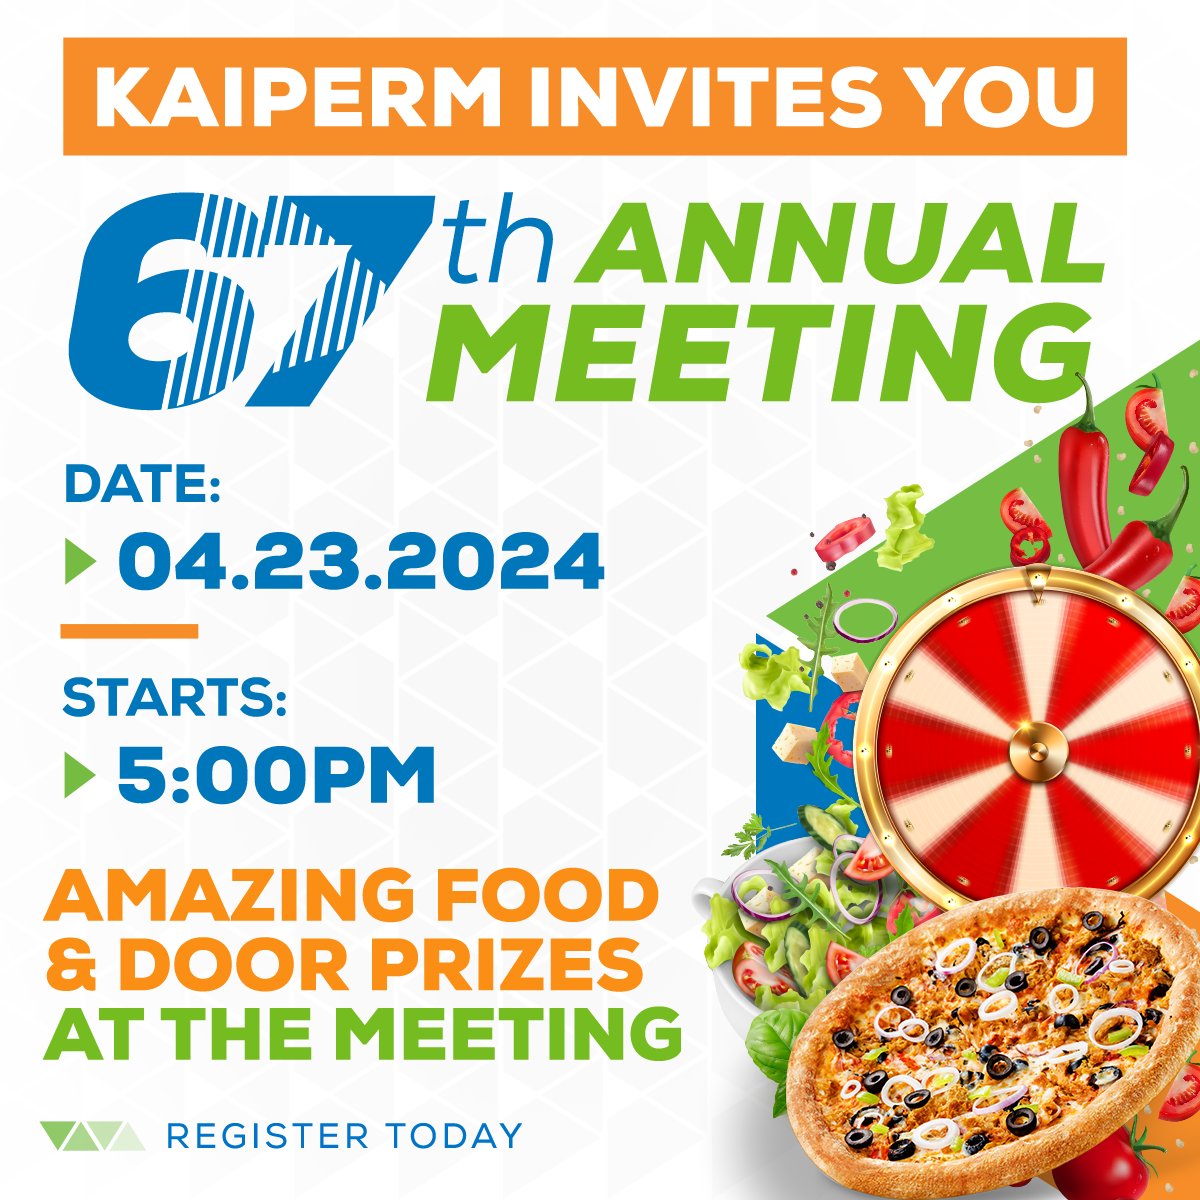 @KaipermFCU's 67th #AnnualMeeting is tomorrow evening at our Main Headquarters in #WalnutCreekCA - we’ll be serving up delectable food, and members will get the chance to walk away with some amazing door prizes! 
➡️ Register: bit.ly/3v2BNyM